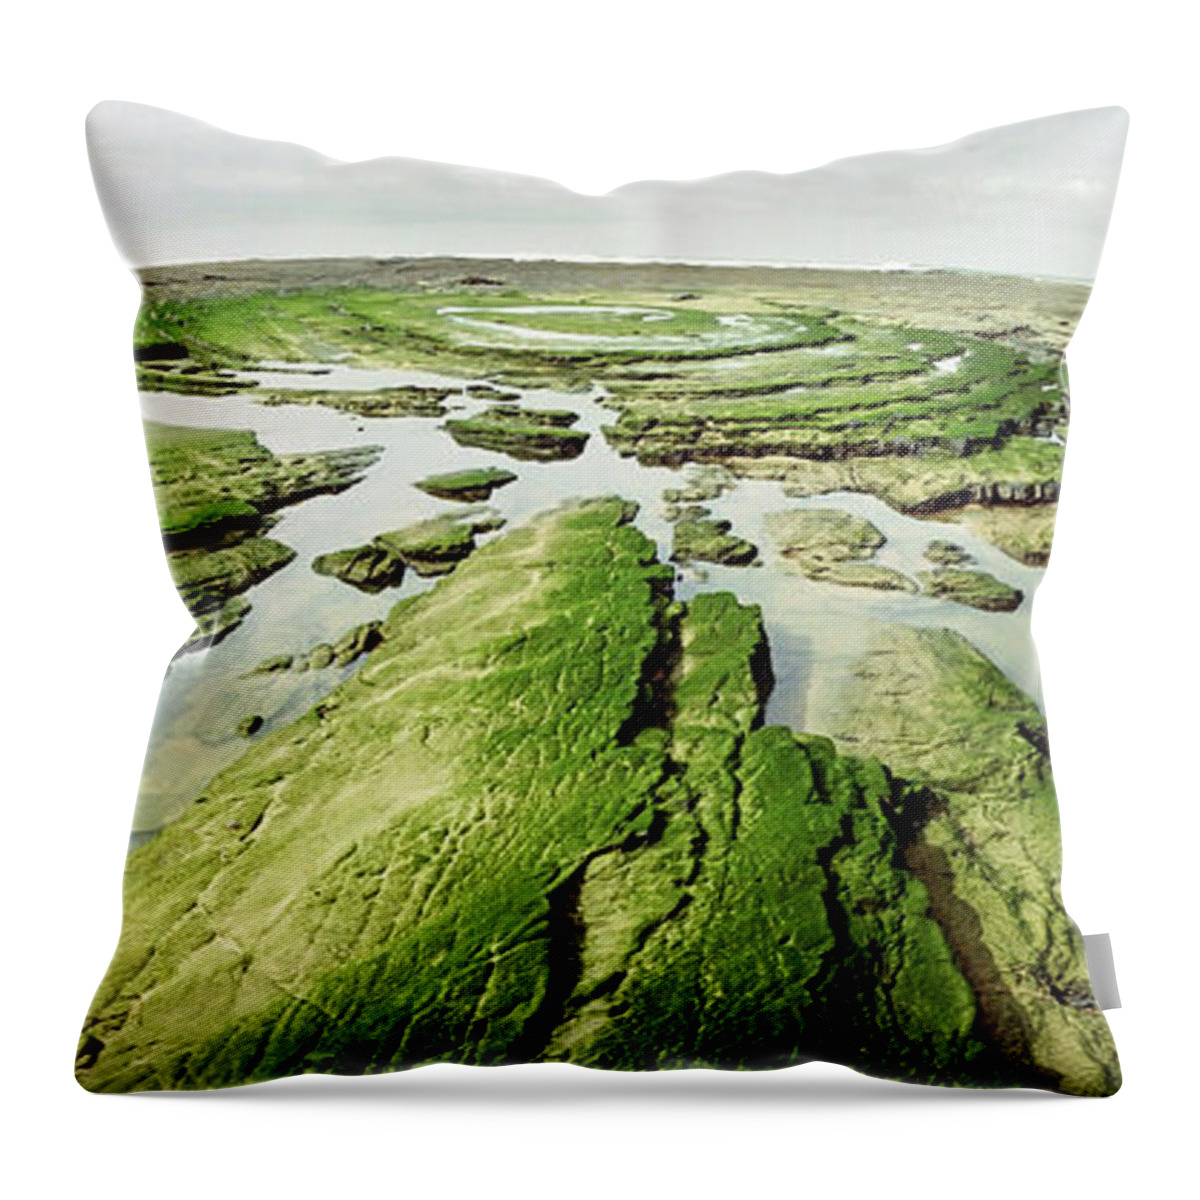 Scenics Throw Pillow featuring the photograph Seaweed Collection by Kari Siren